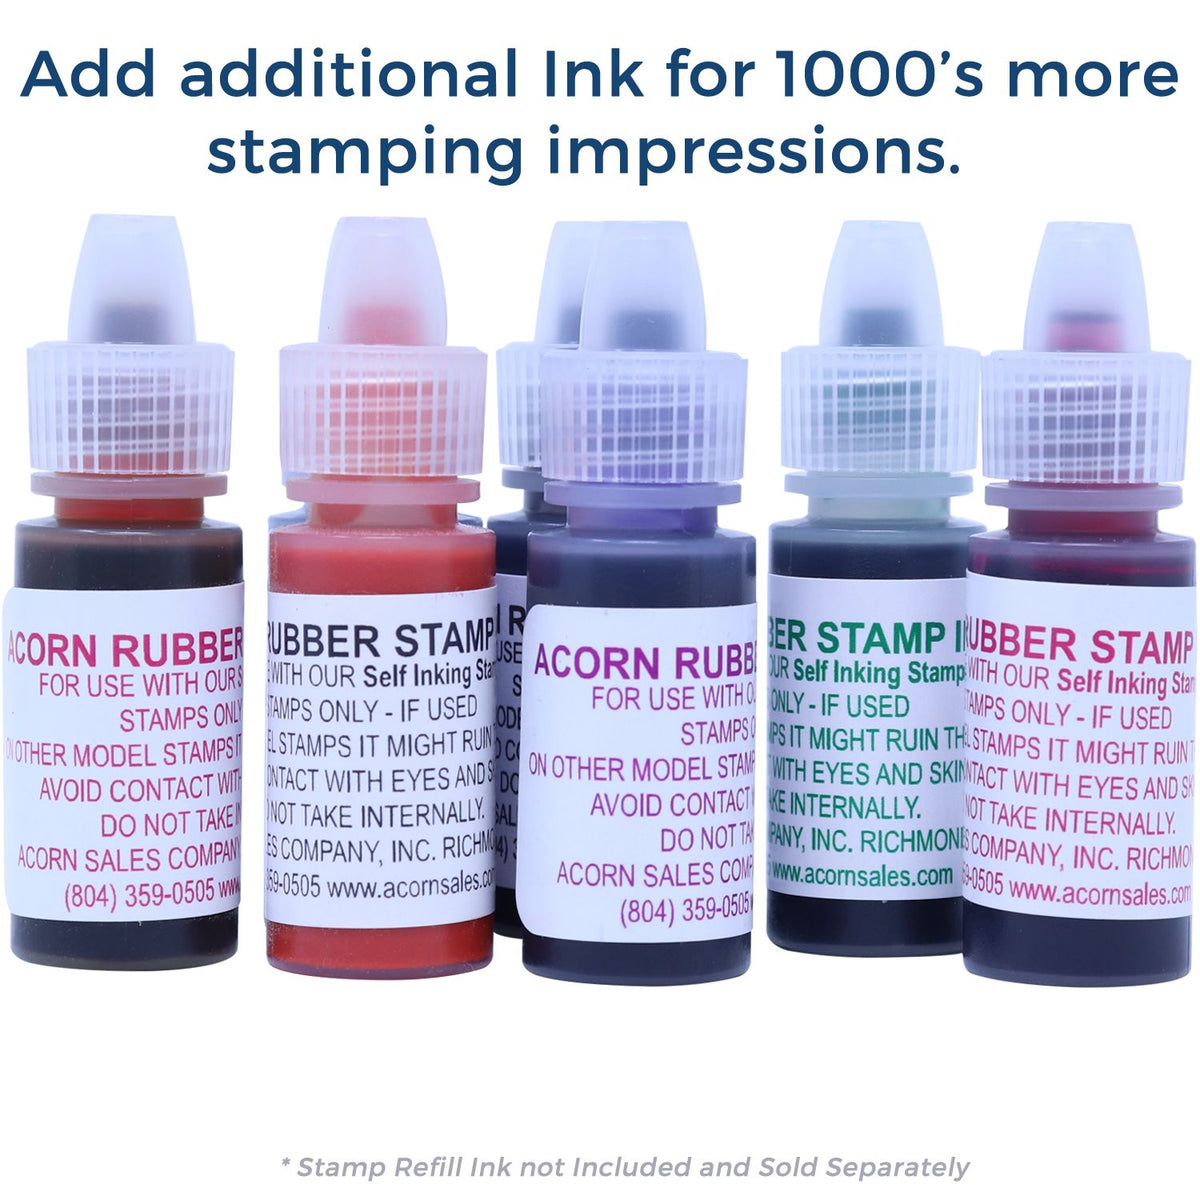 Refill Ink for Self-Inking Round Draft Stamp Available